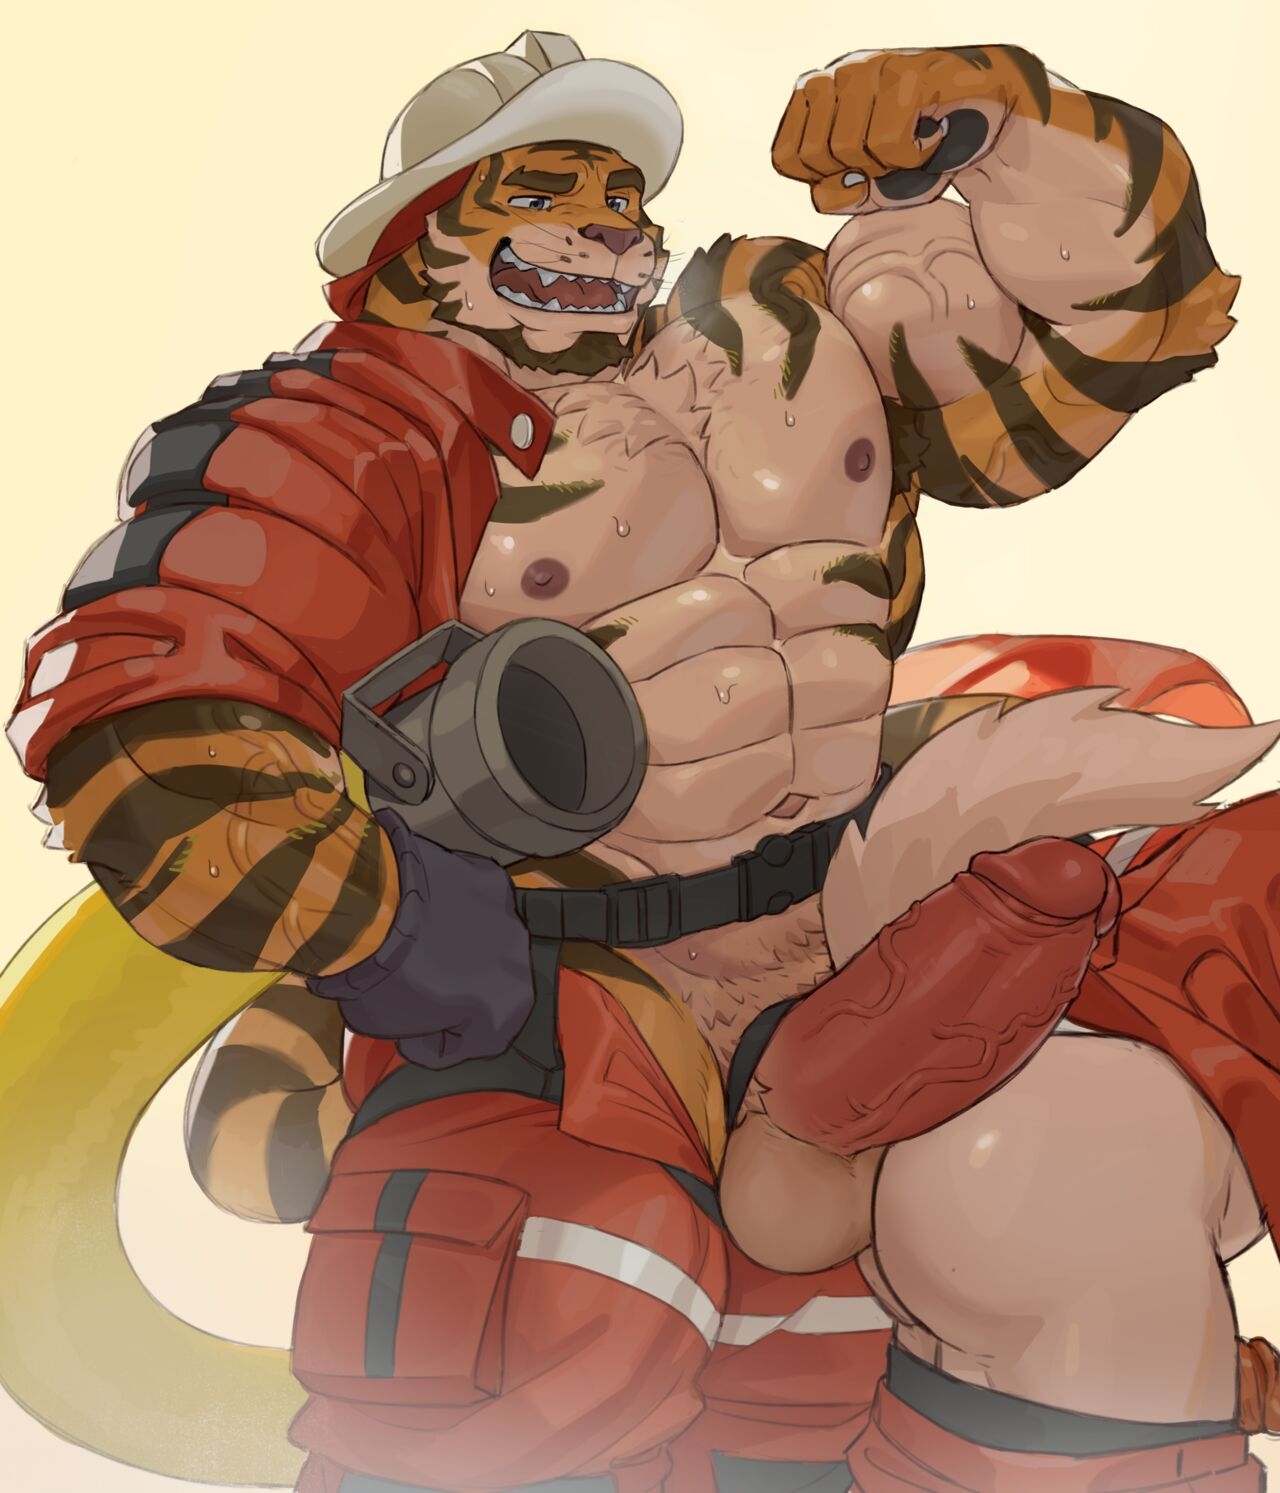 [Imatoart] Tiger Fire Chief's Training Session | 老虎消防队长的训练时间! [Chinese][Translated by Chrome Heart Tags] 40